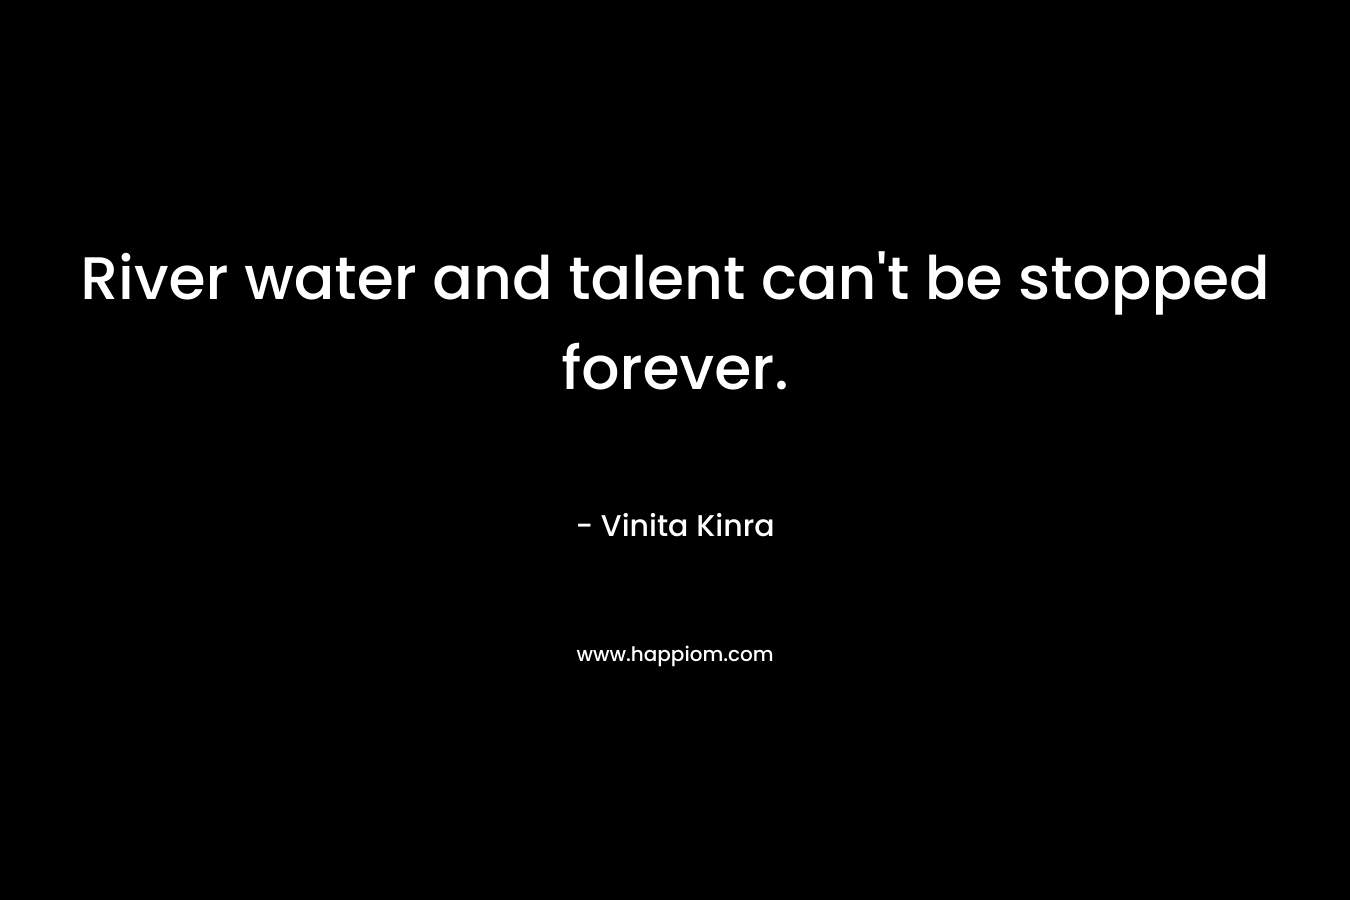 River water and talent can't be stopped forever.